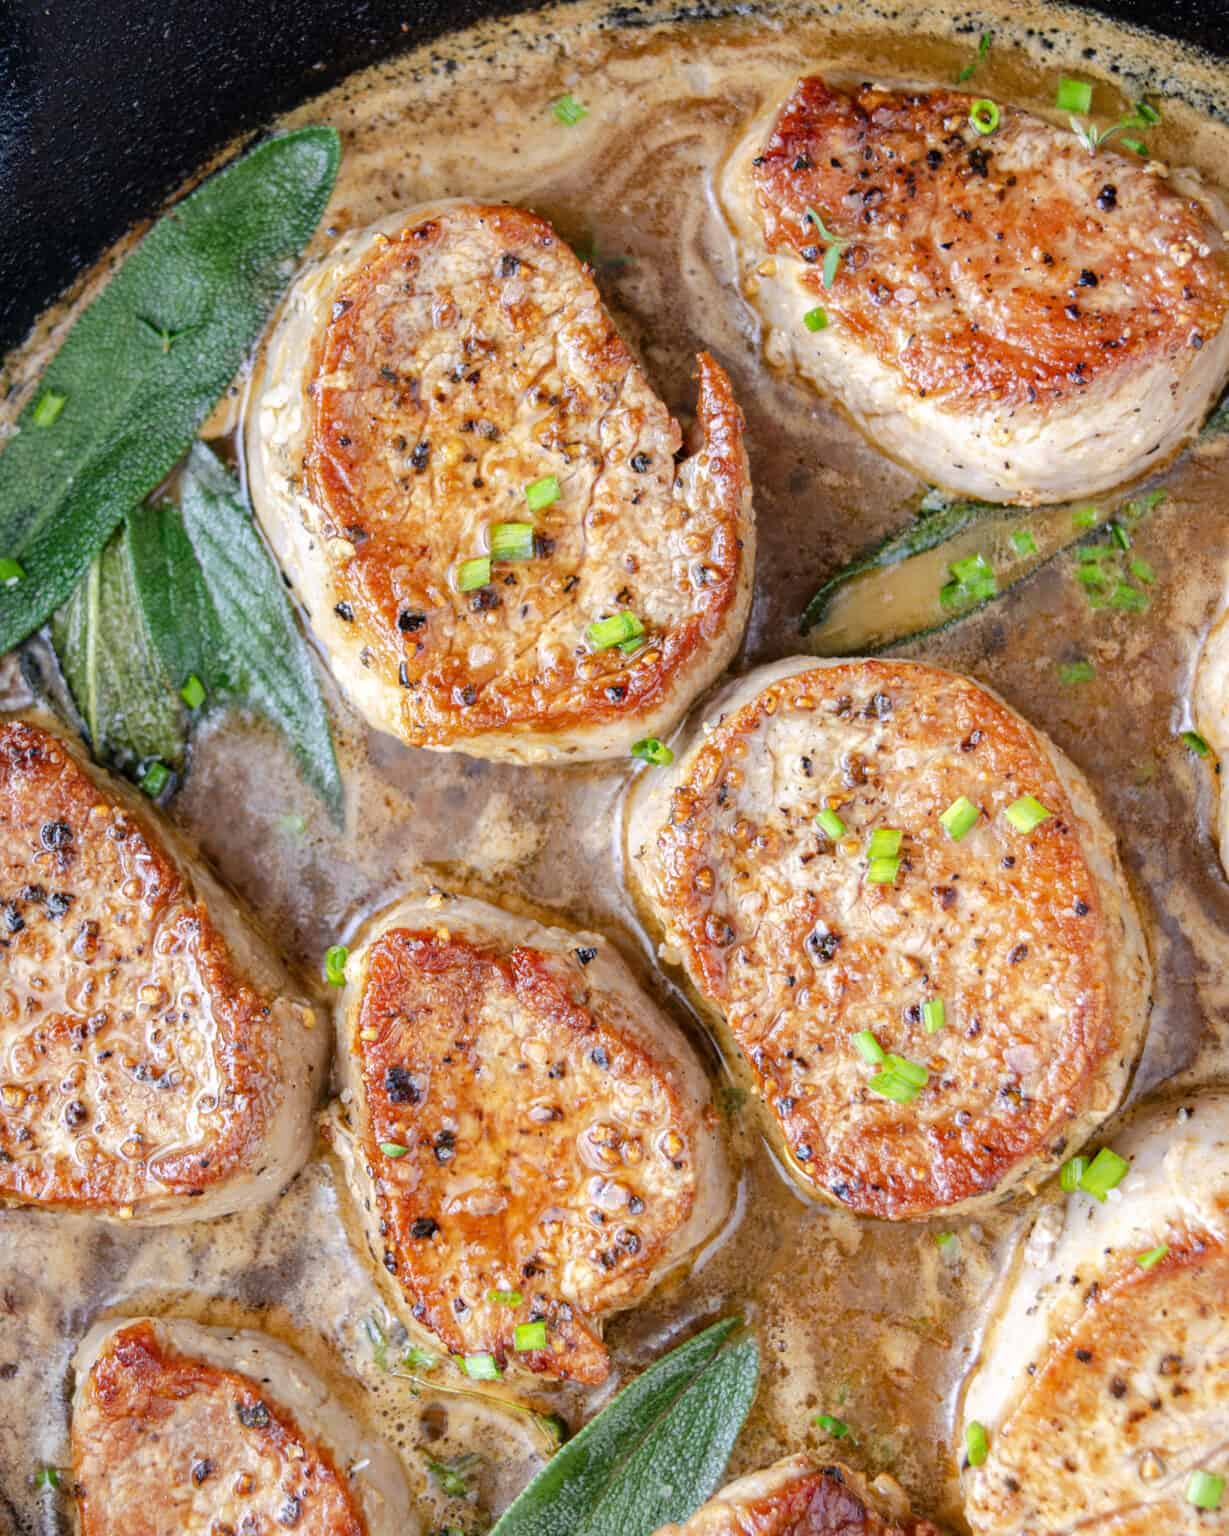 Seared pork medallions with brown butter gravy in a cast iron skillet.